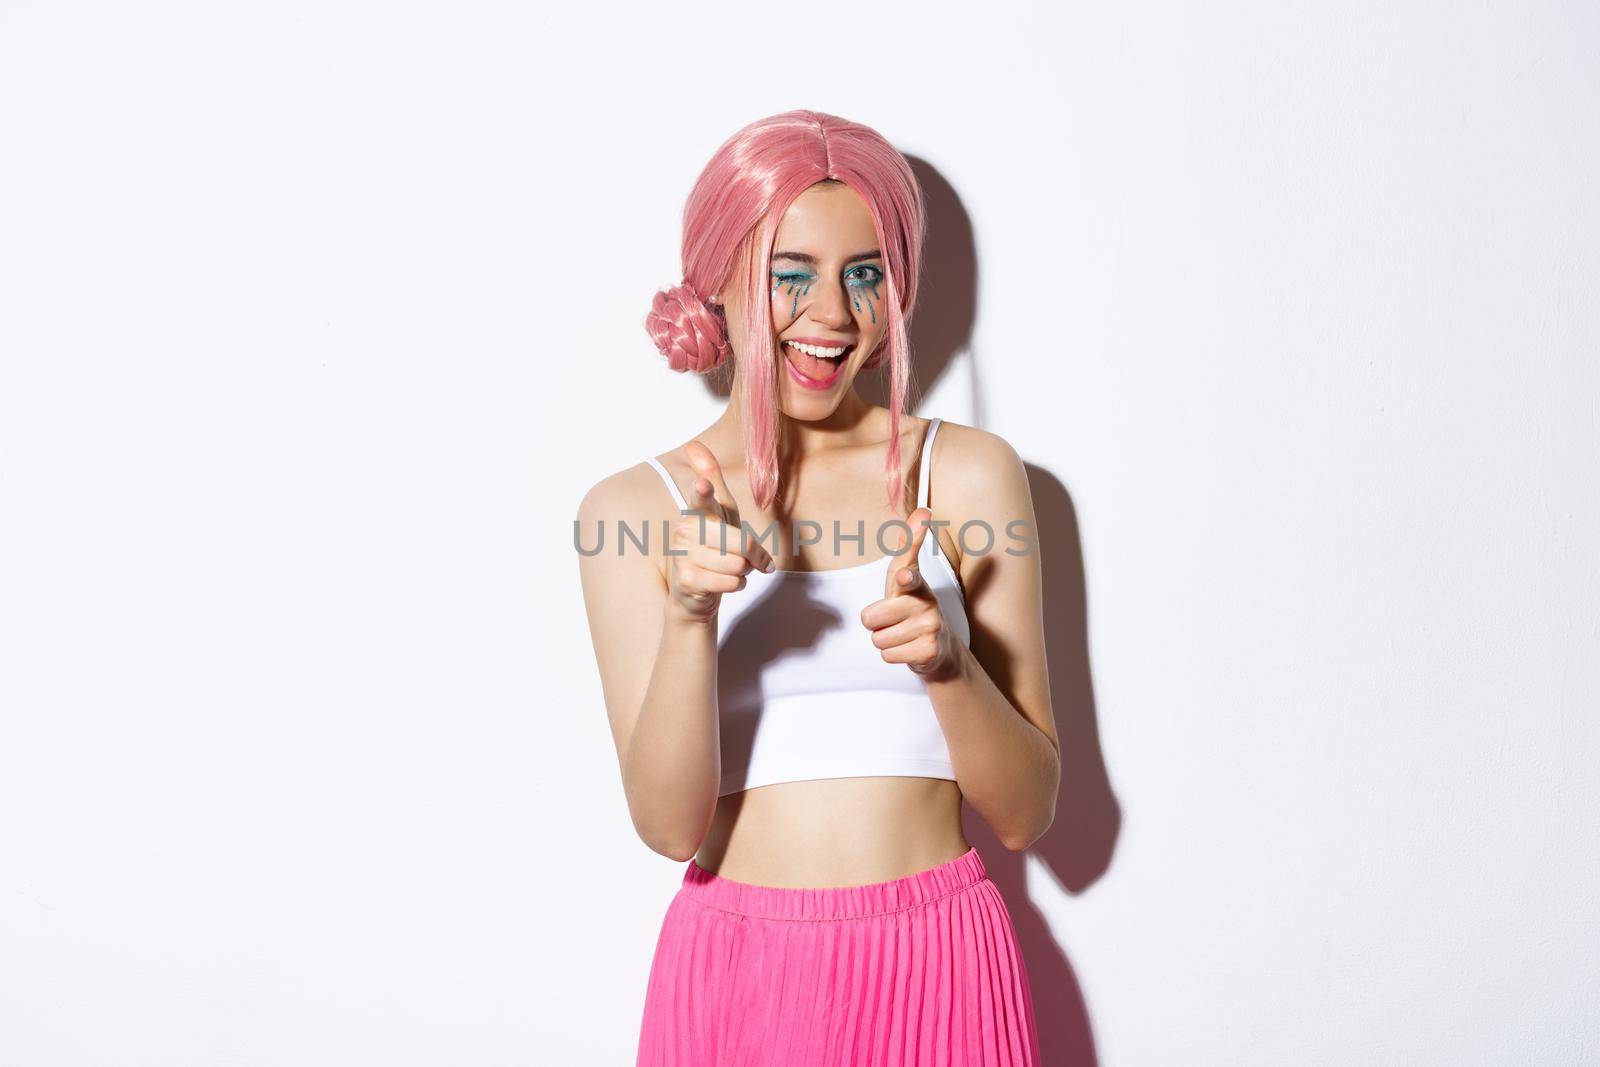 Sassy attractive girl in halloween costume and pink wig, pointing at camera and smiling, congratulating or praising someone, standing over white background.